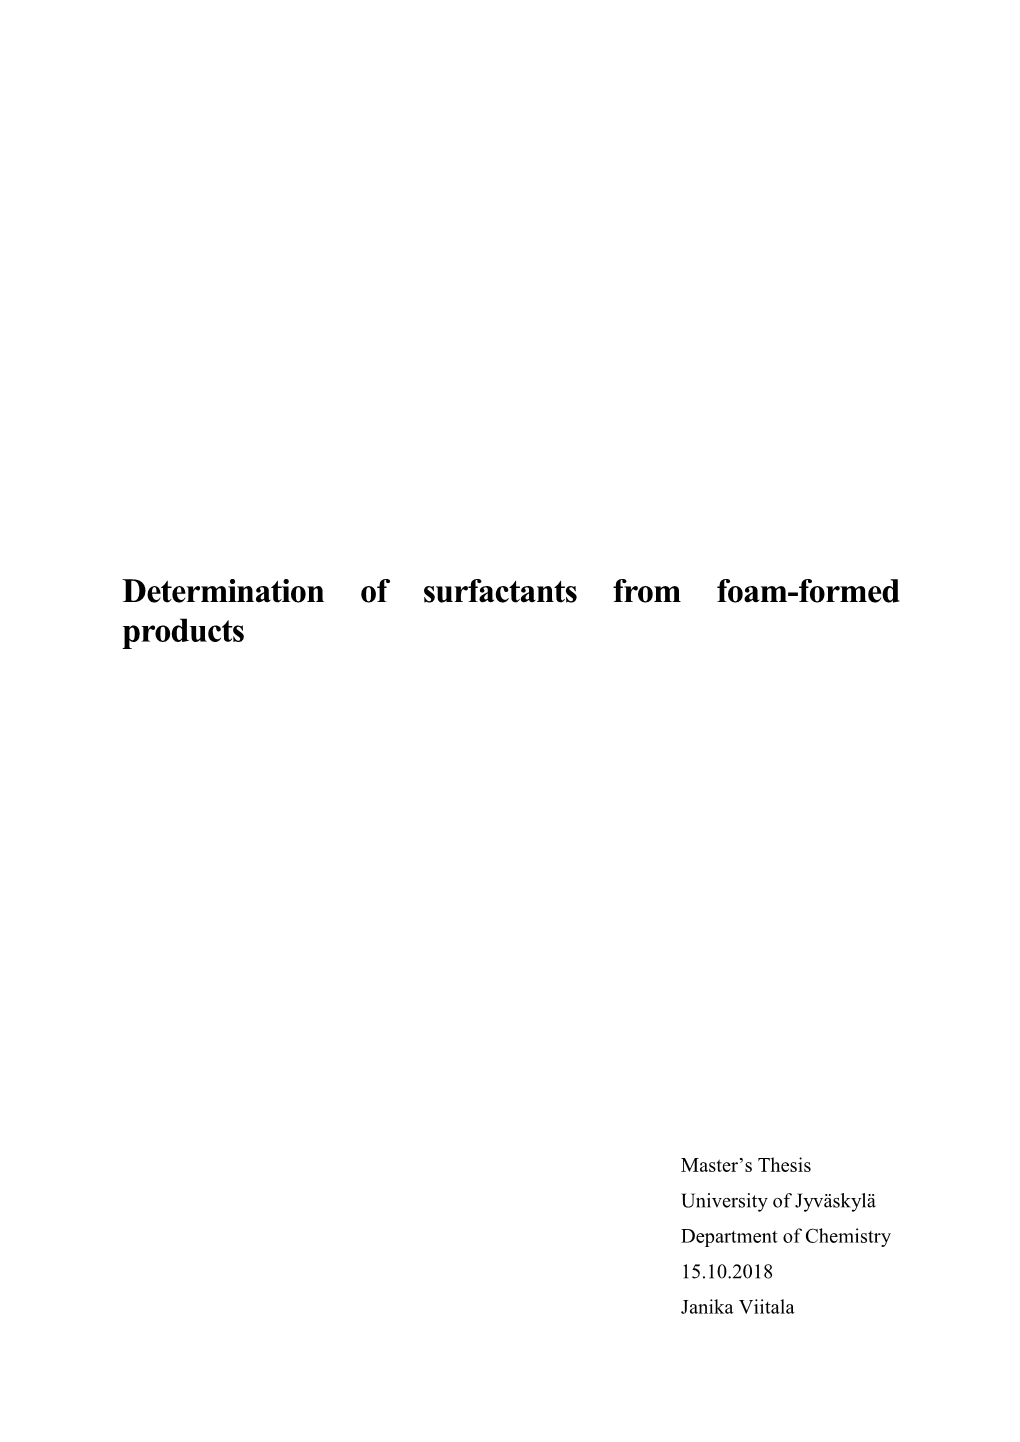 Determination of Surfactants from Foam-Formed Products